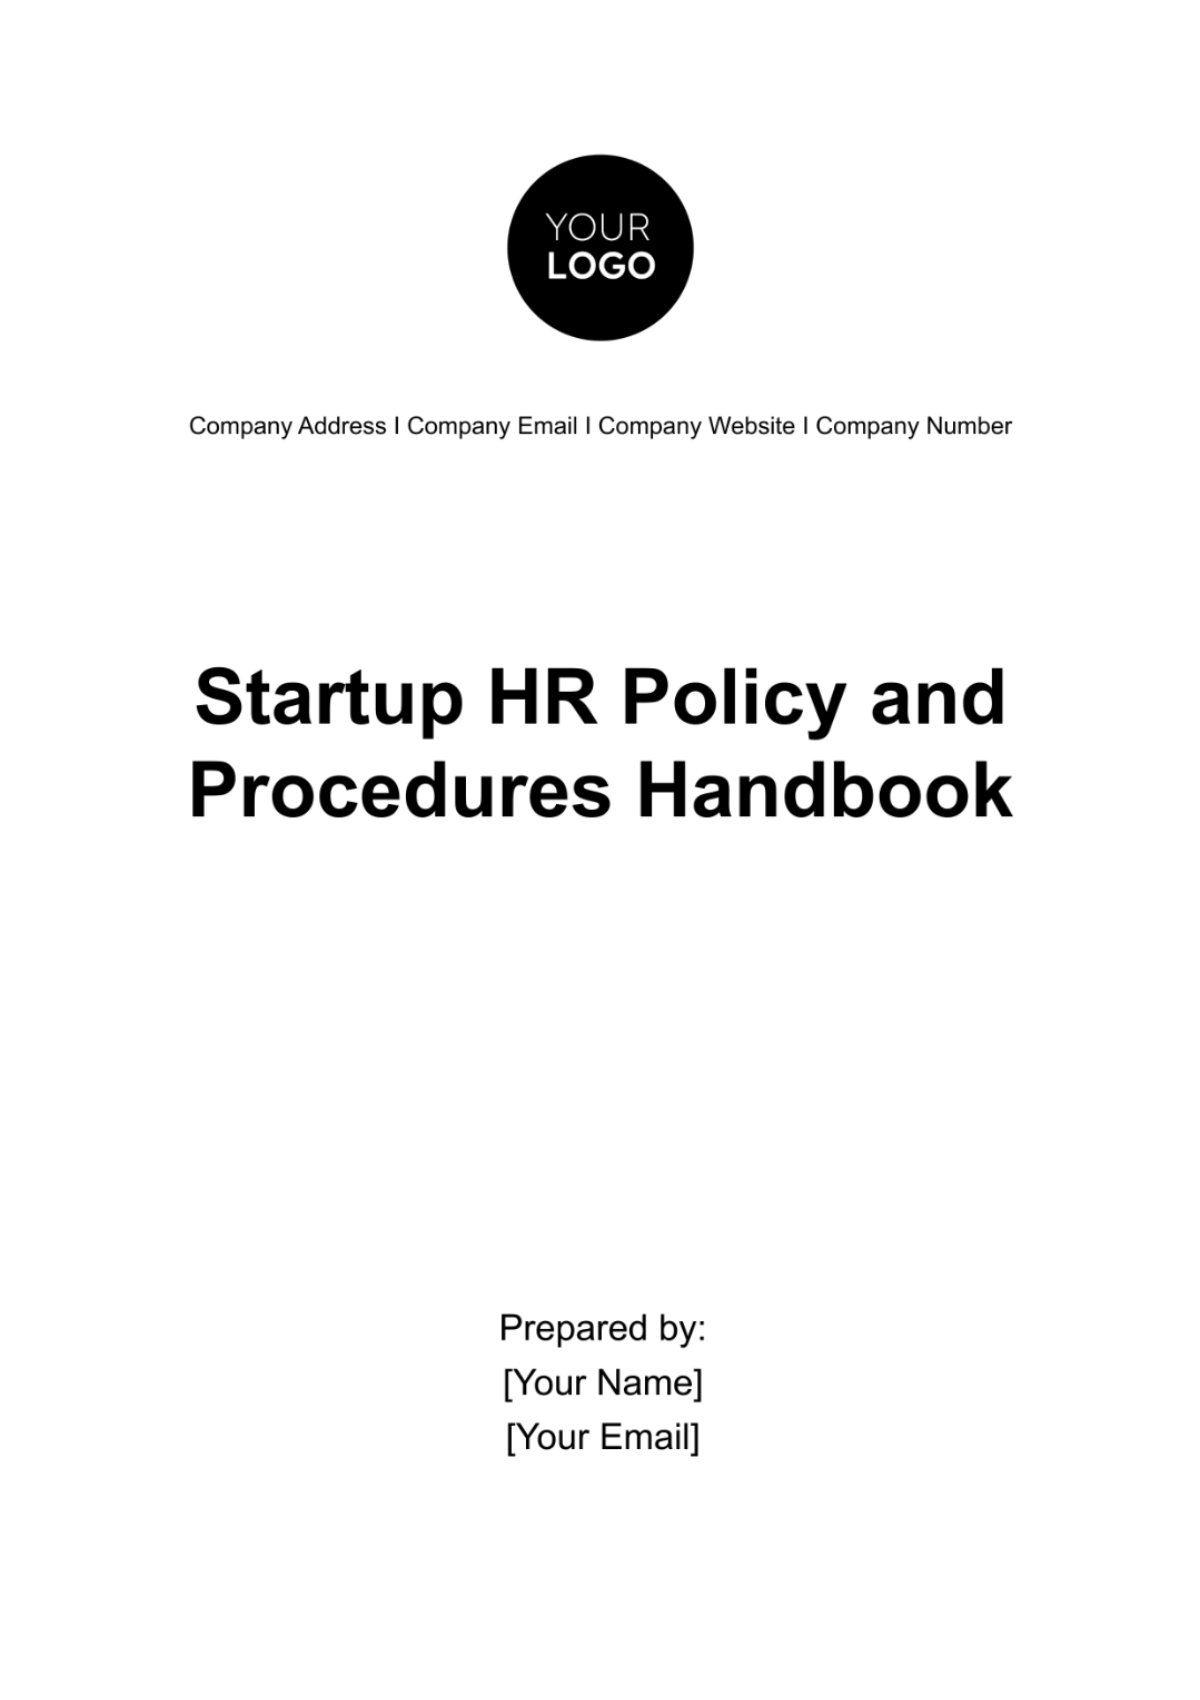 Free Startup HR Policy and Procedures Handbook Template